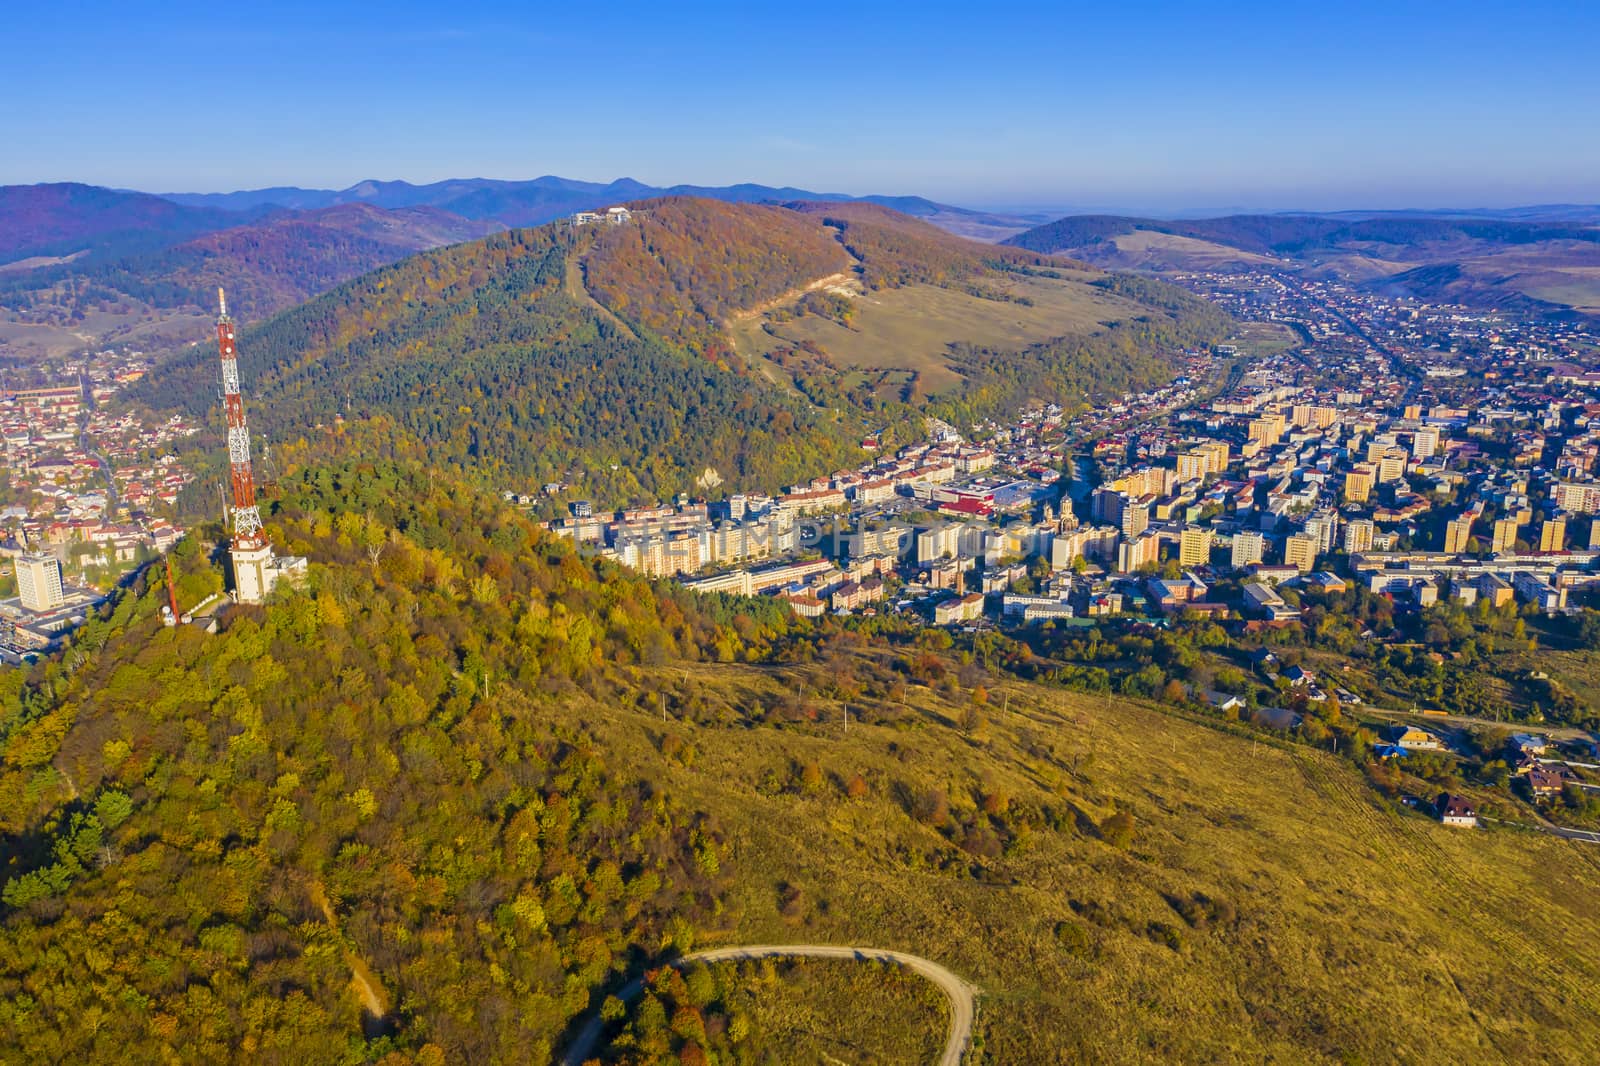 Aerial view of antenna tower and Piatra Neamt city in the valley, autumn landscape.